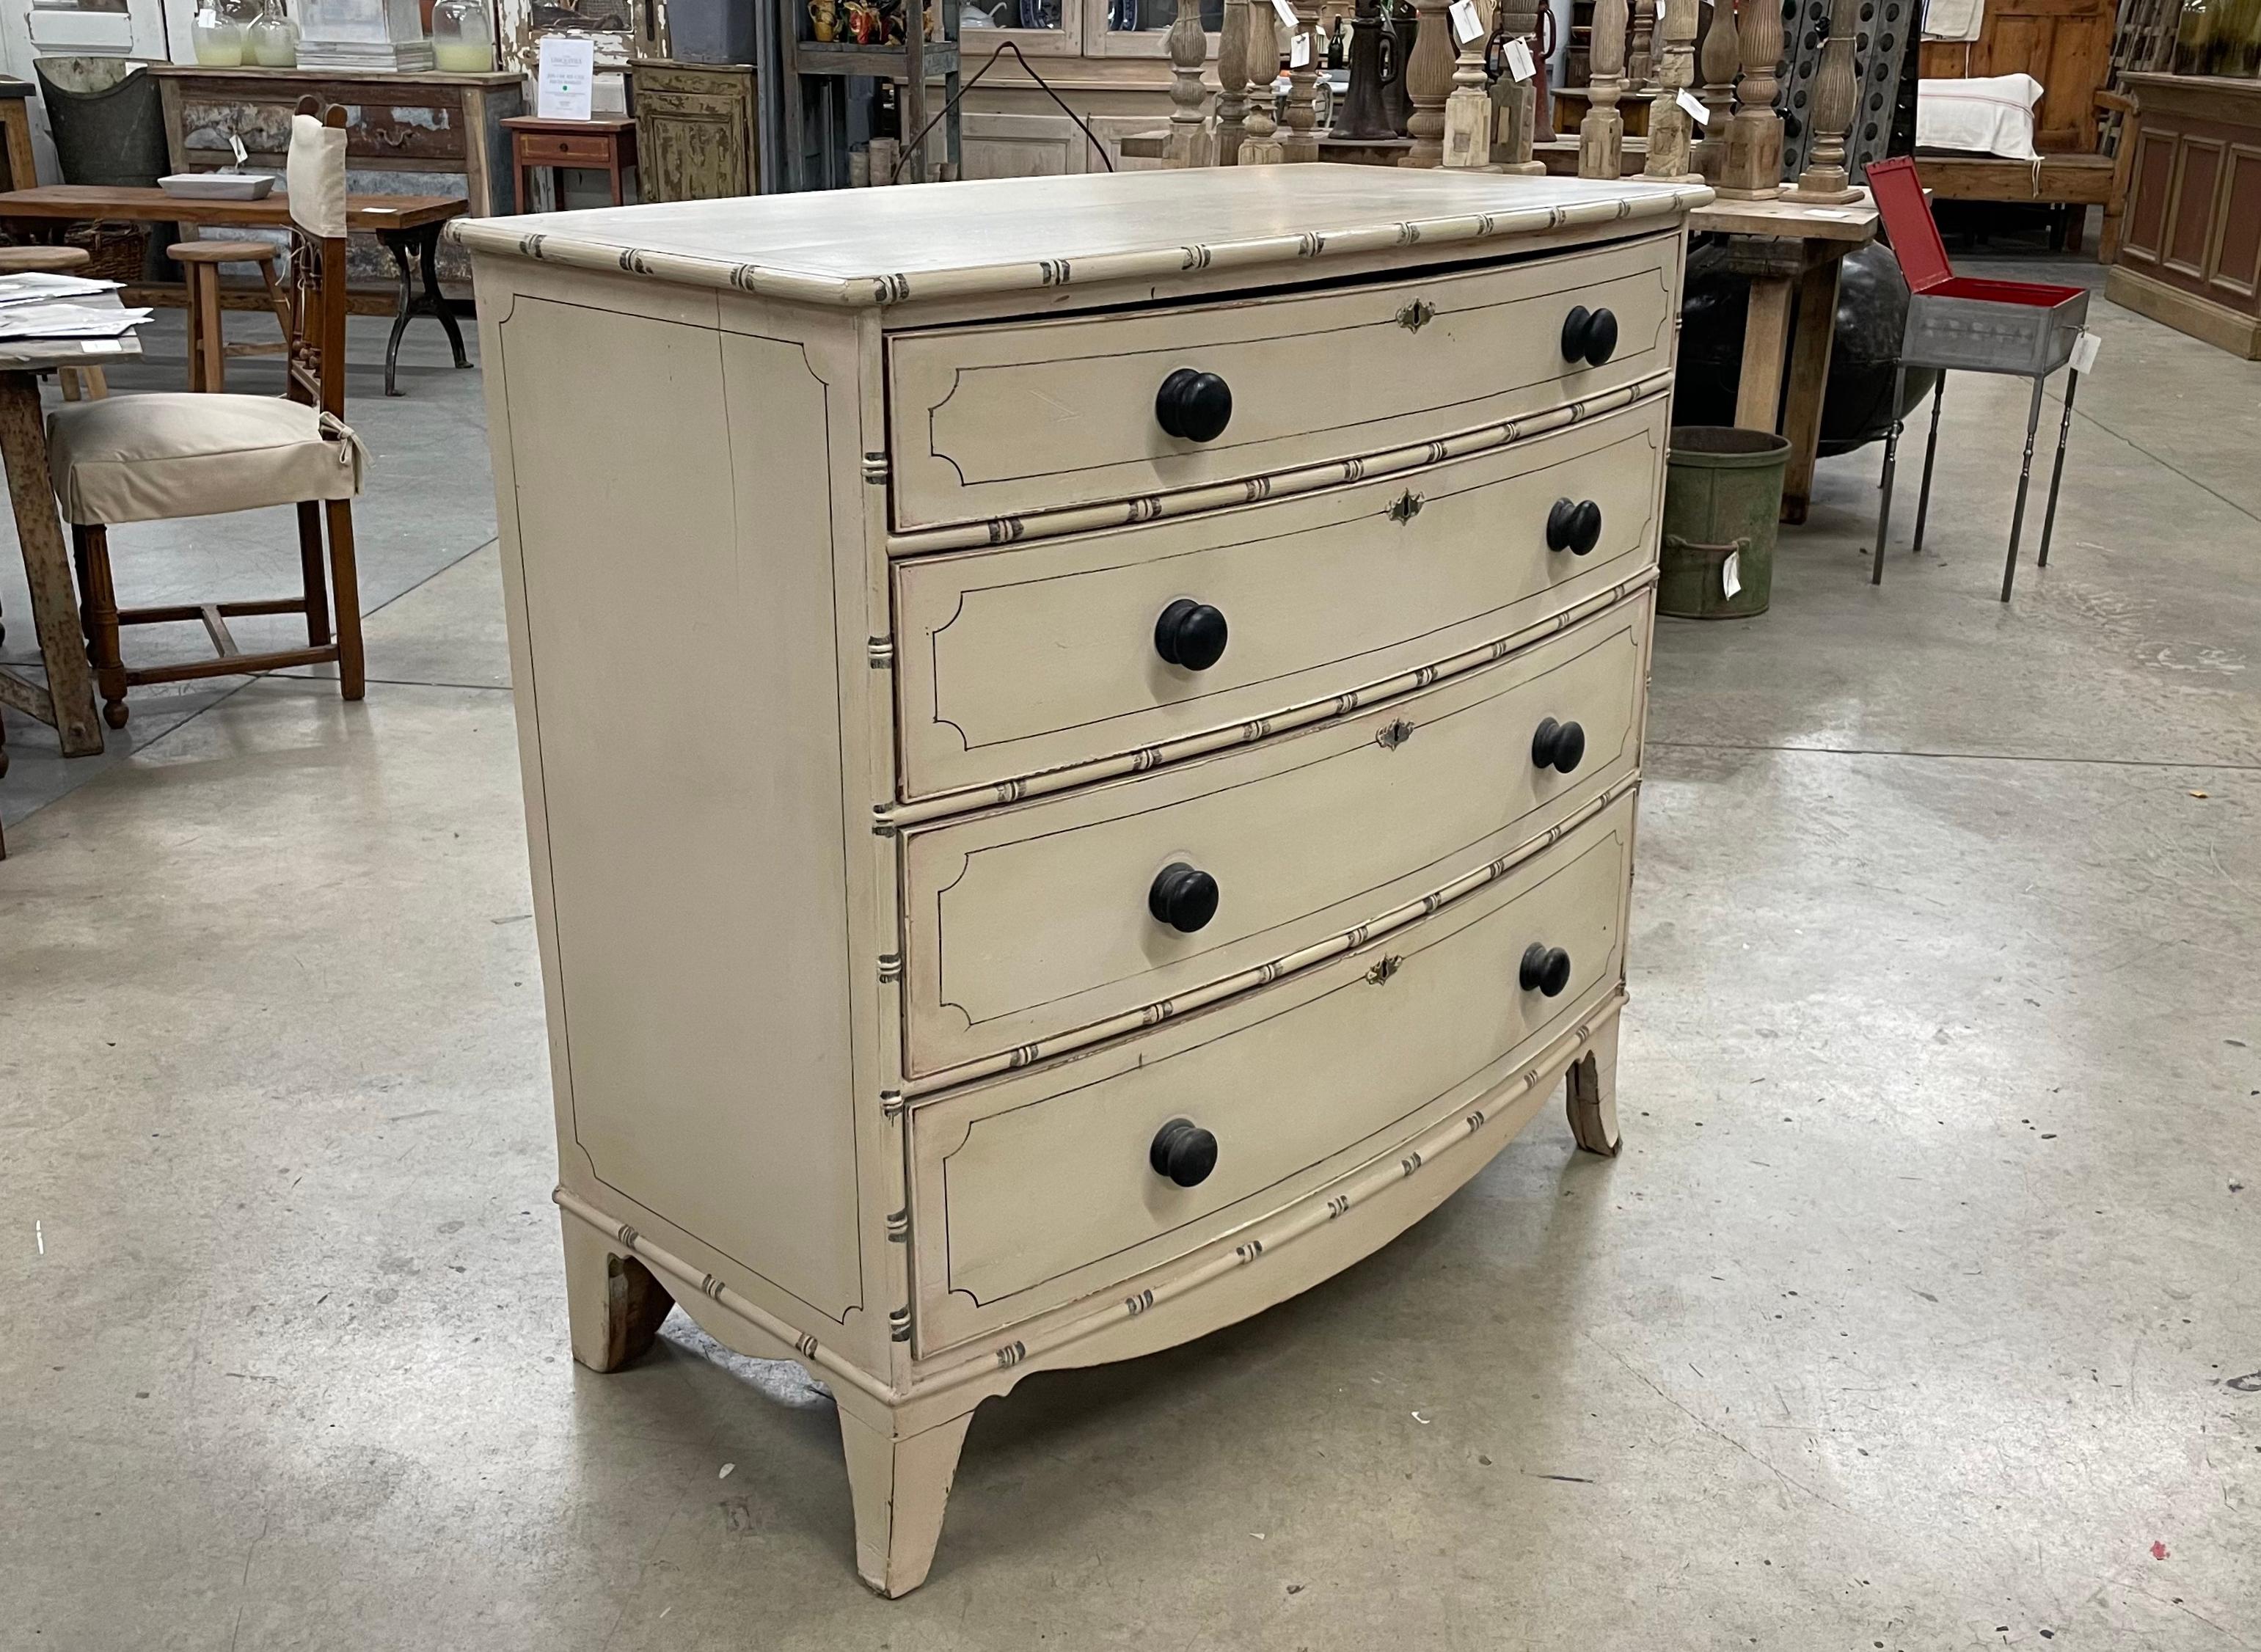 Antique English Regency bow fronted chest of drawers.

This beautiful painted faux bamboo dresser has 2 smaller drawers over 3 larger drawers with original wooden knobs and sits on stile feet.

A versatile piece of furniture that does not have to be